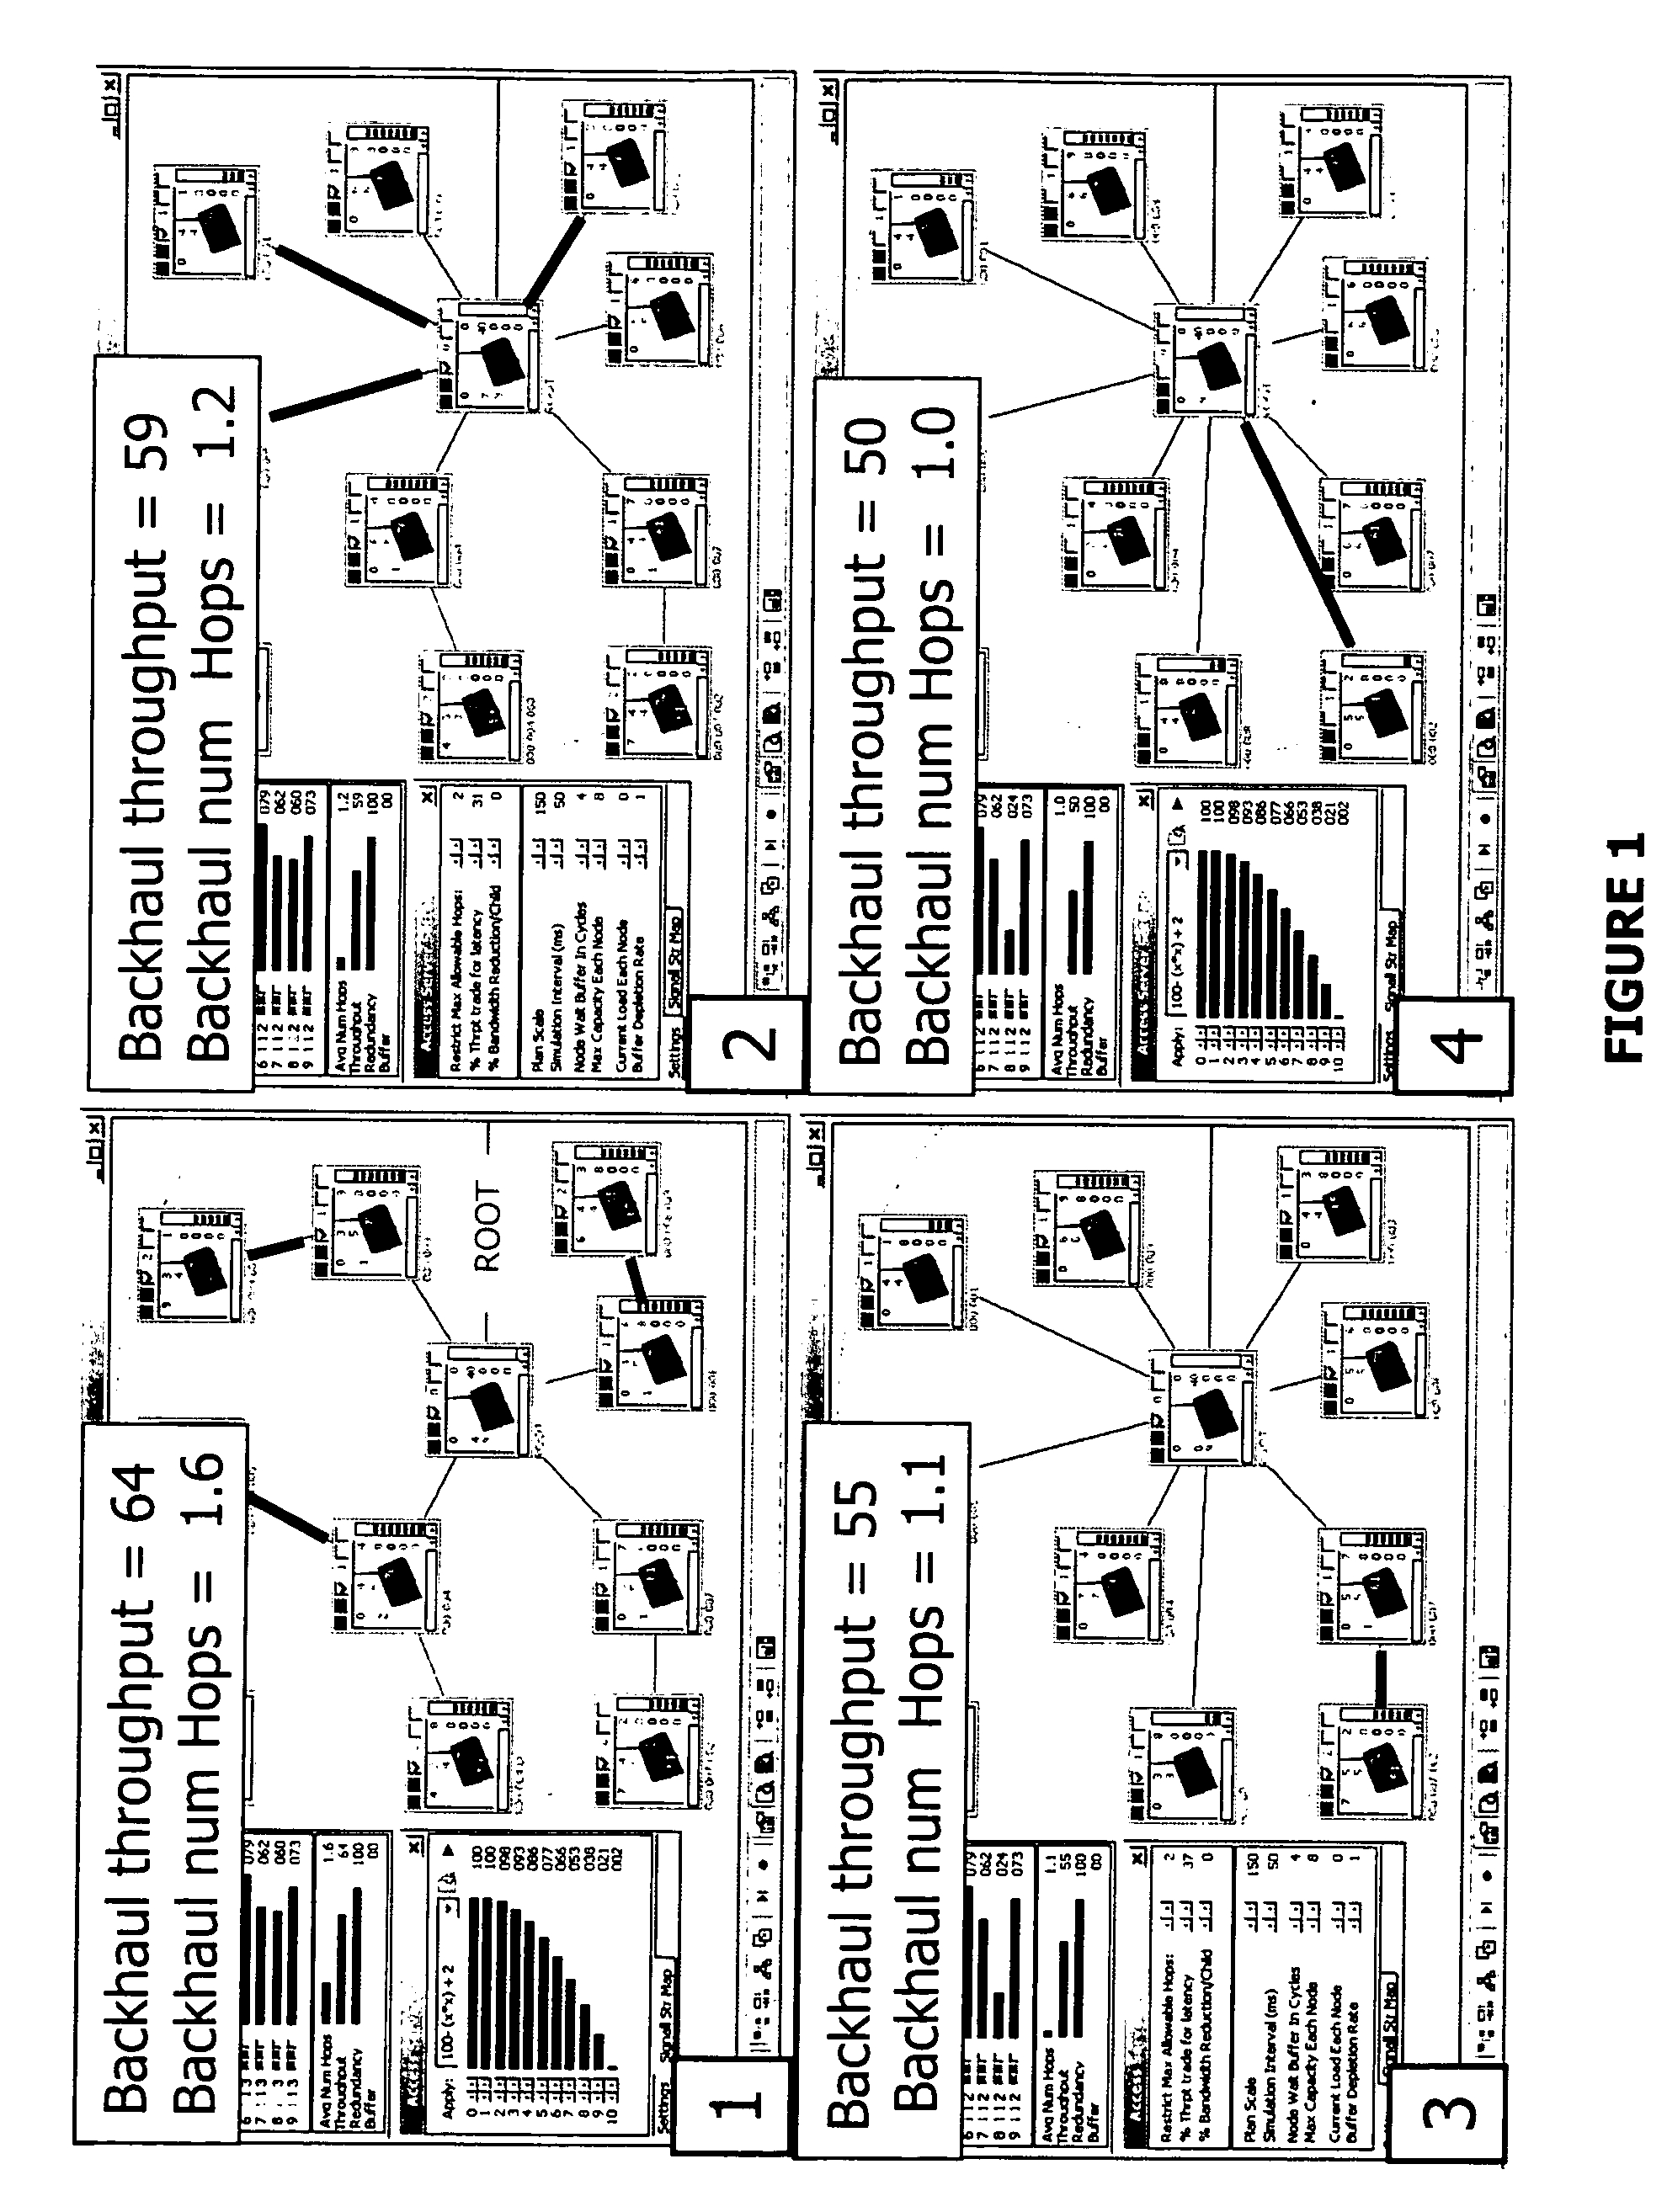 Multiple-radio mission critical wireless mesh networks